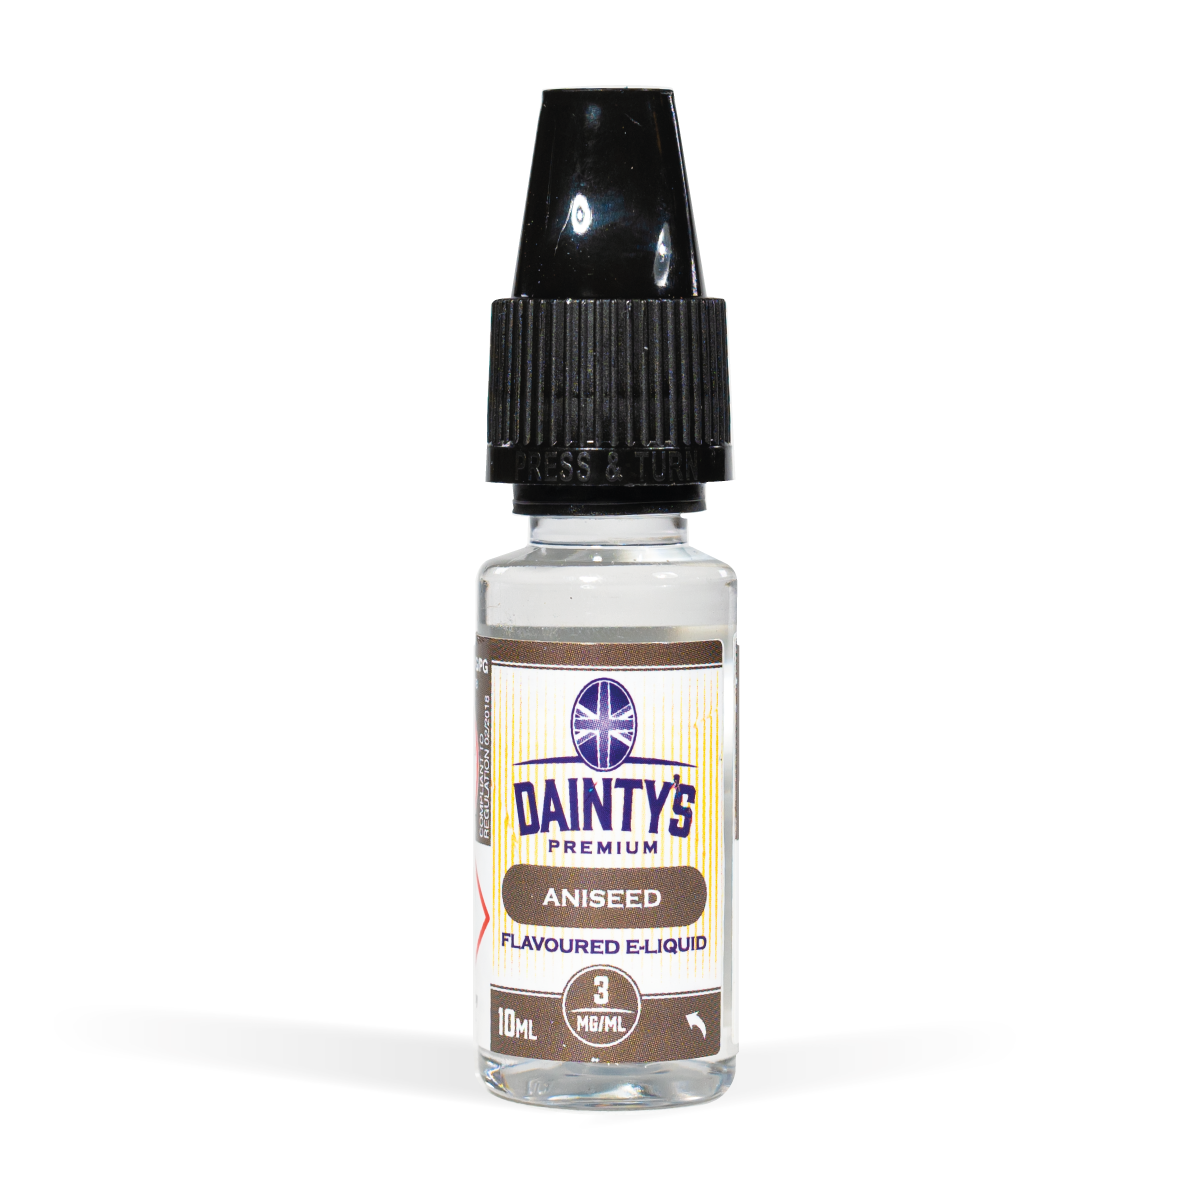 Daintys Aniseed 10ml on white background